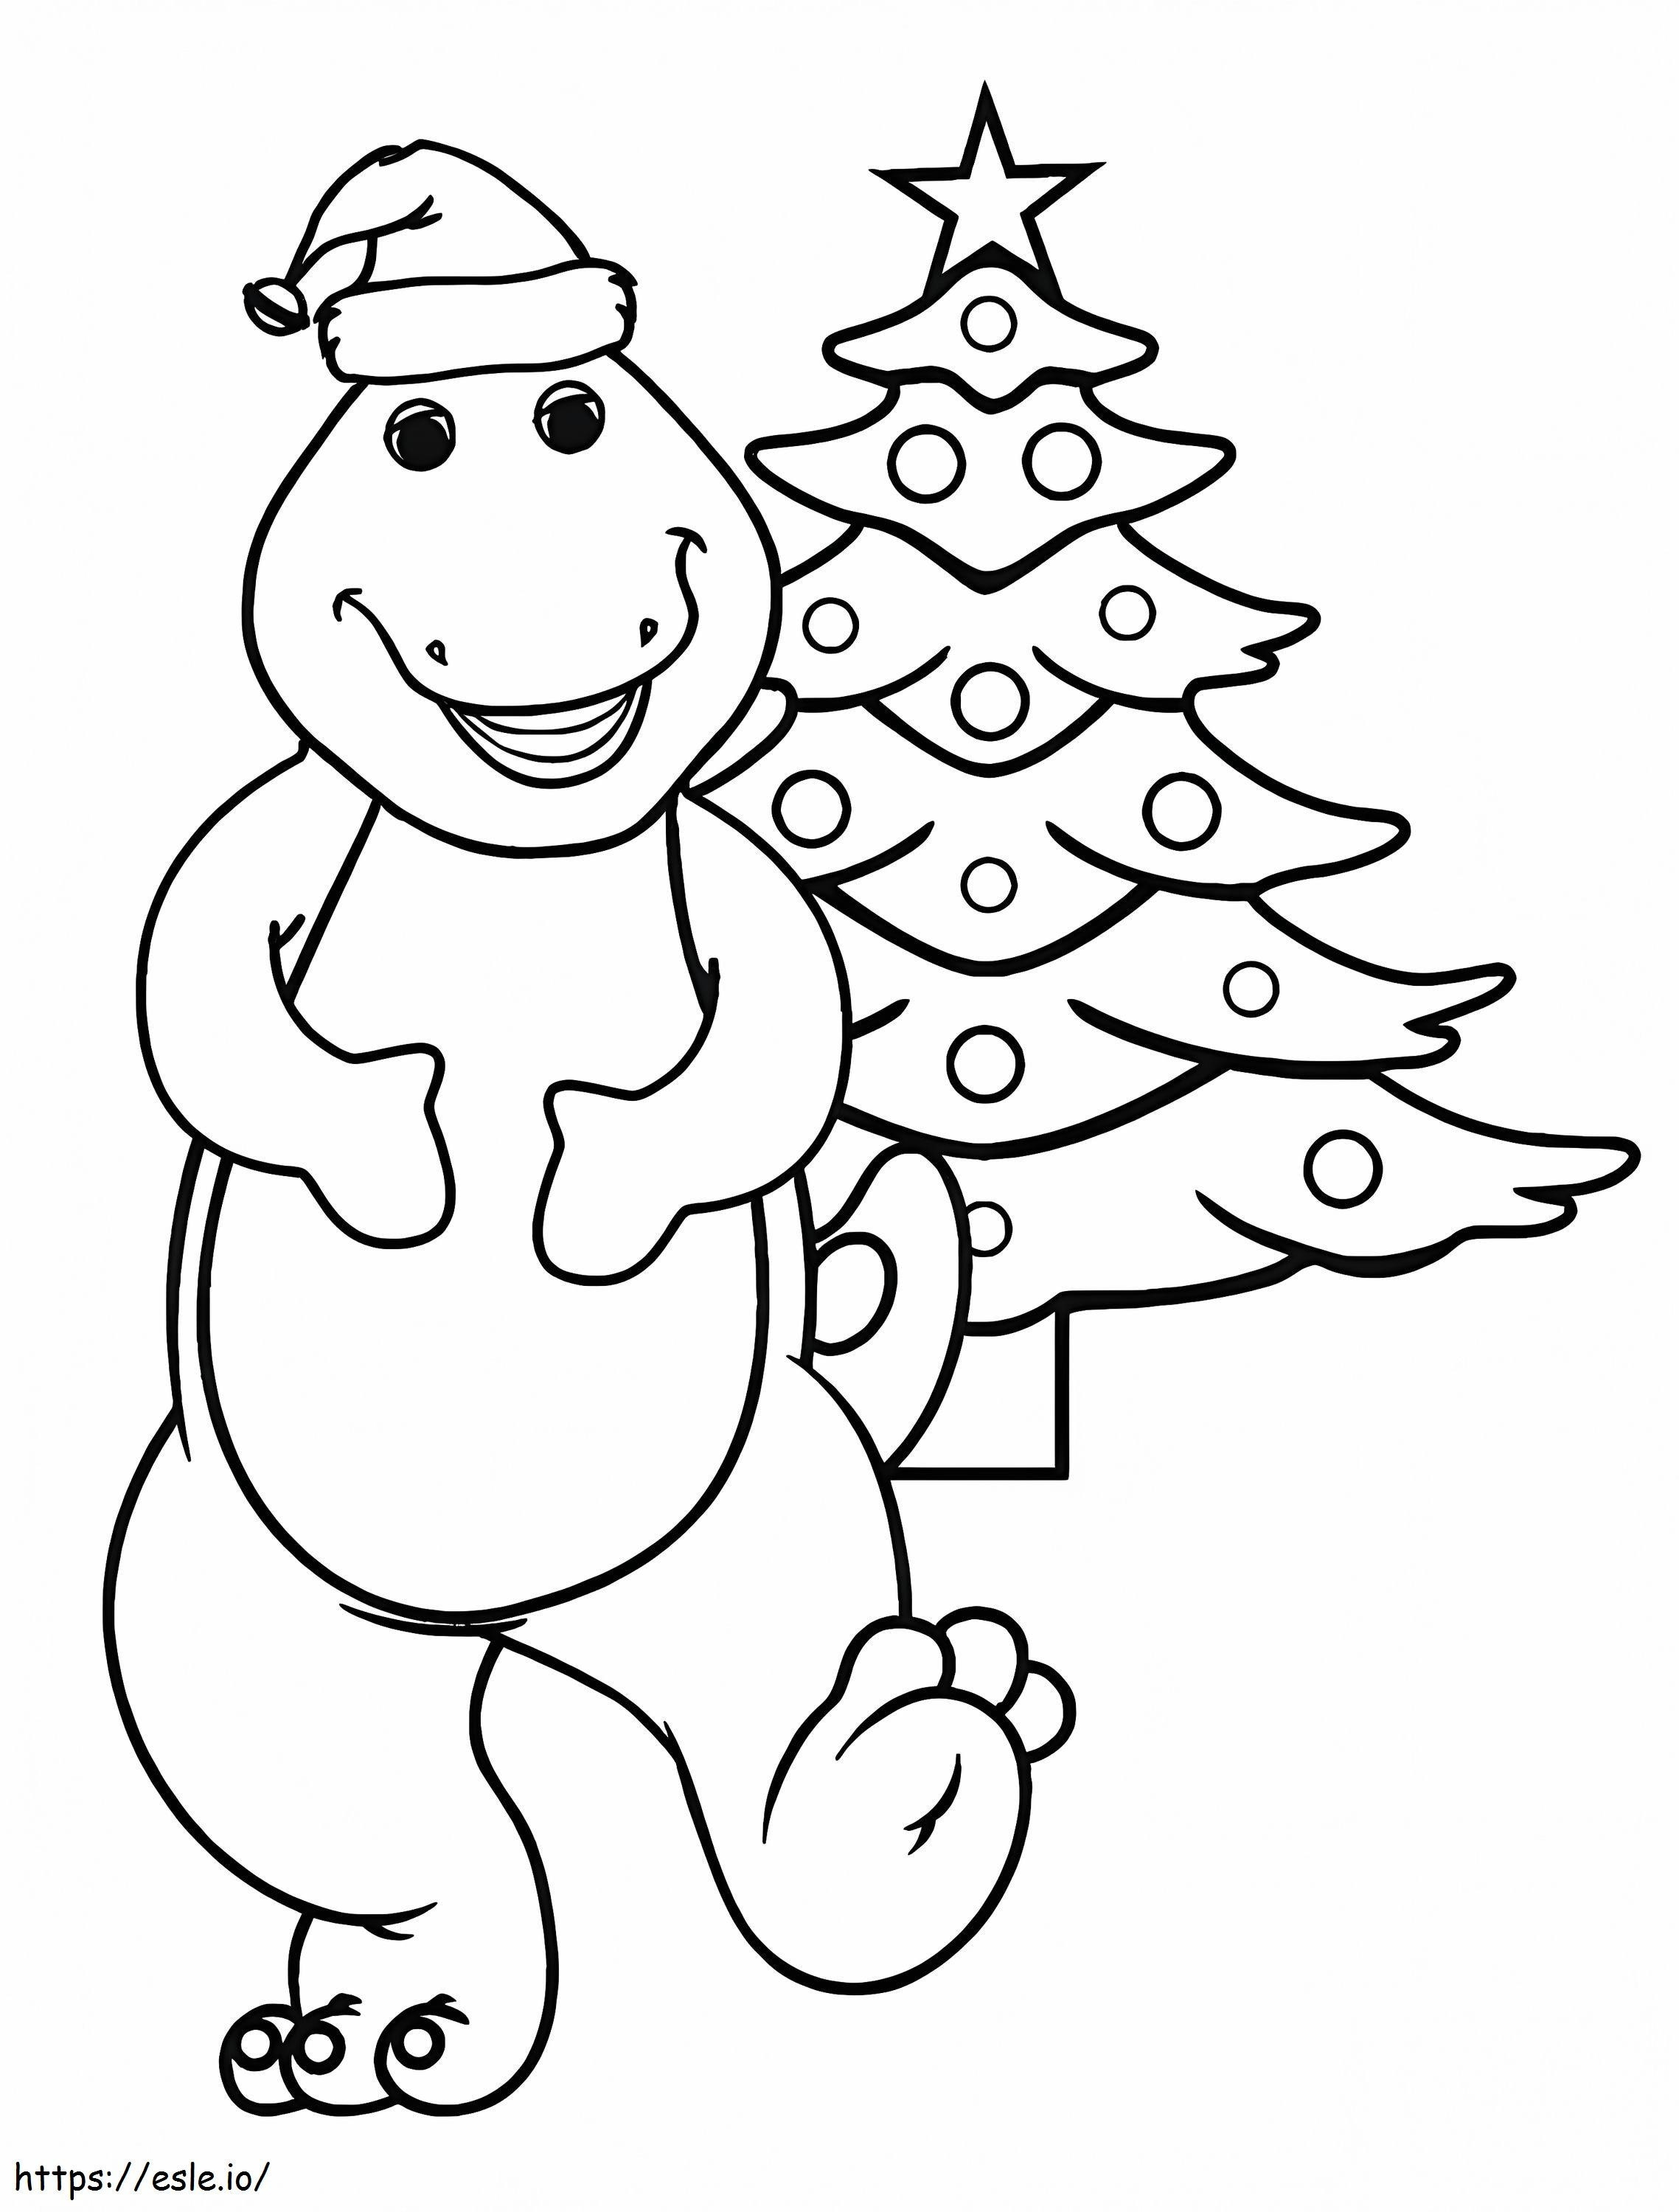 Barney And The Christmas Tree coloring page